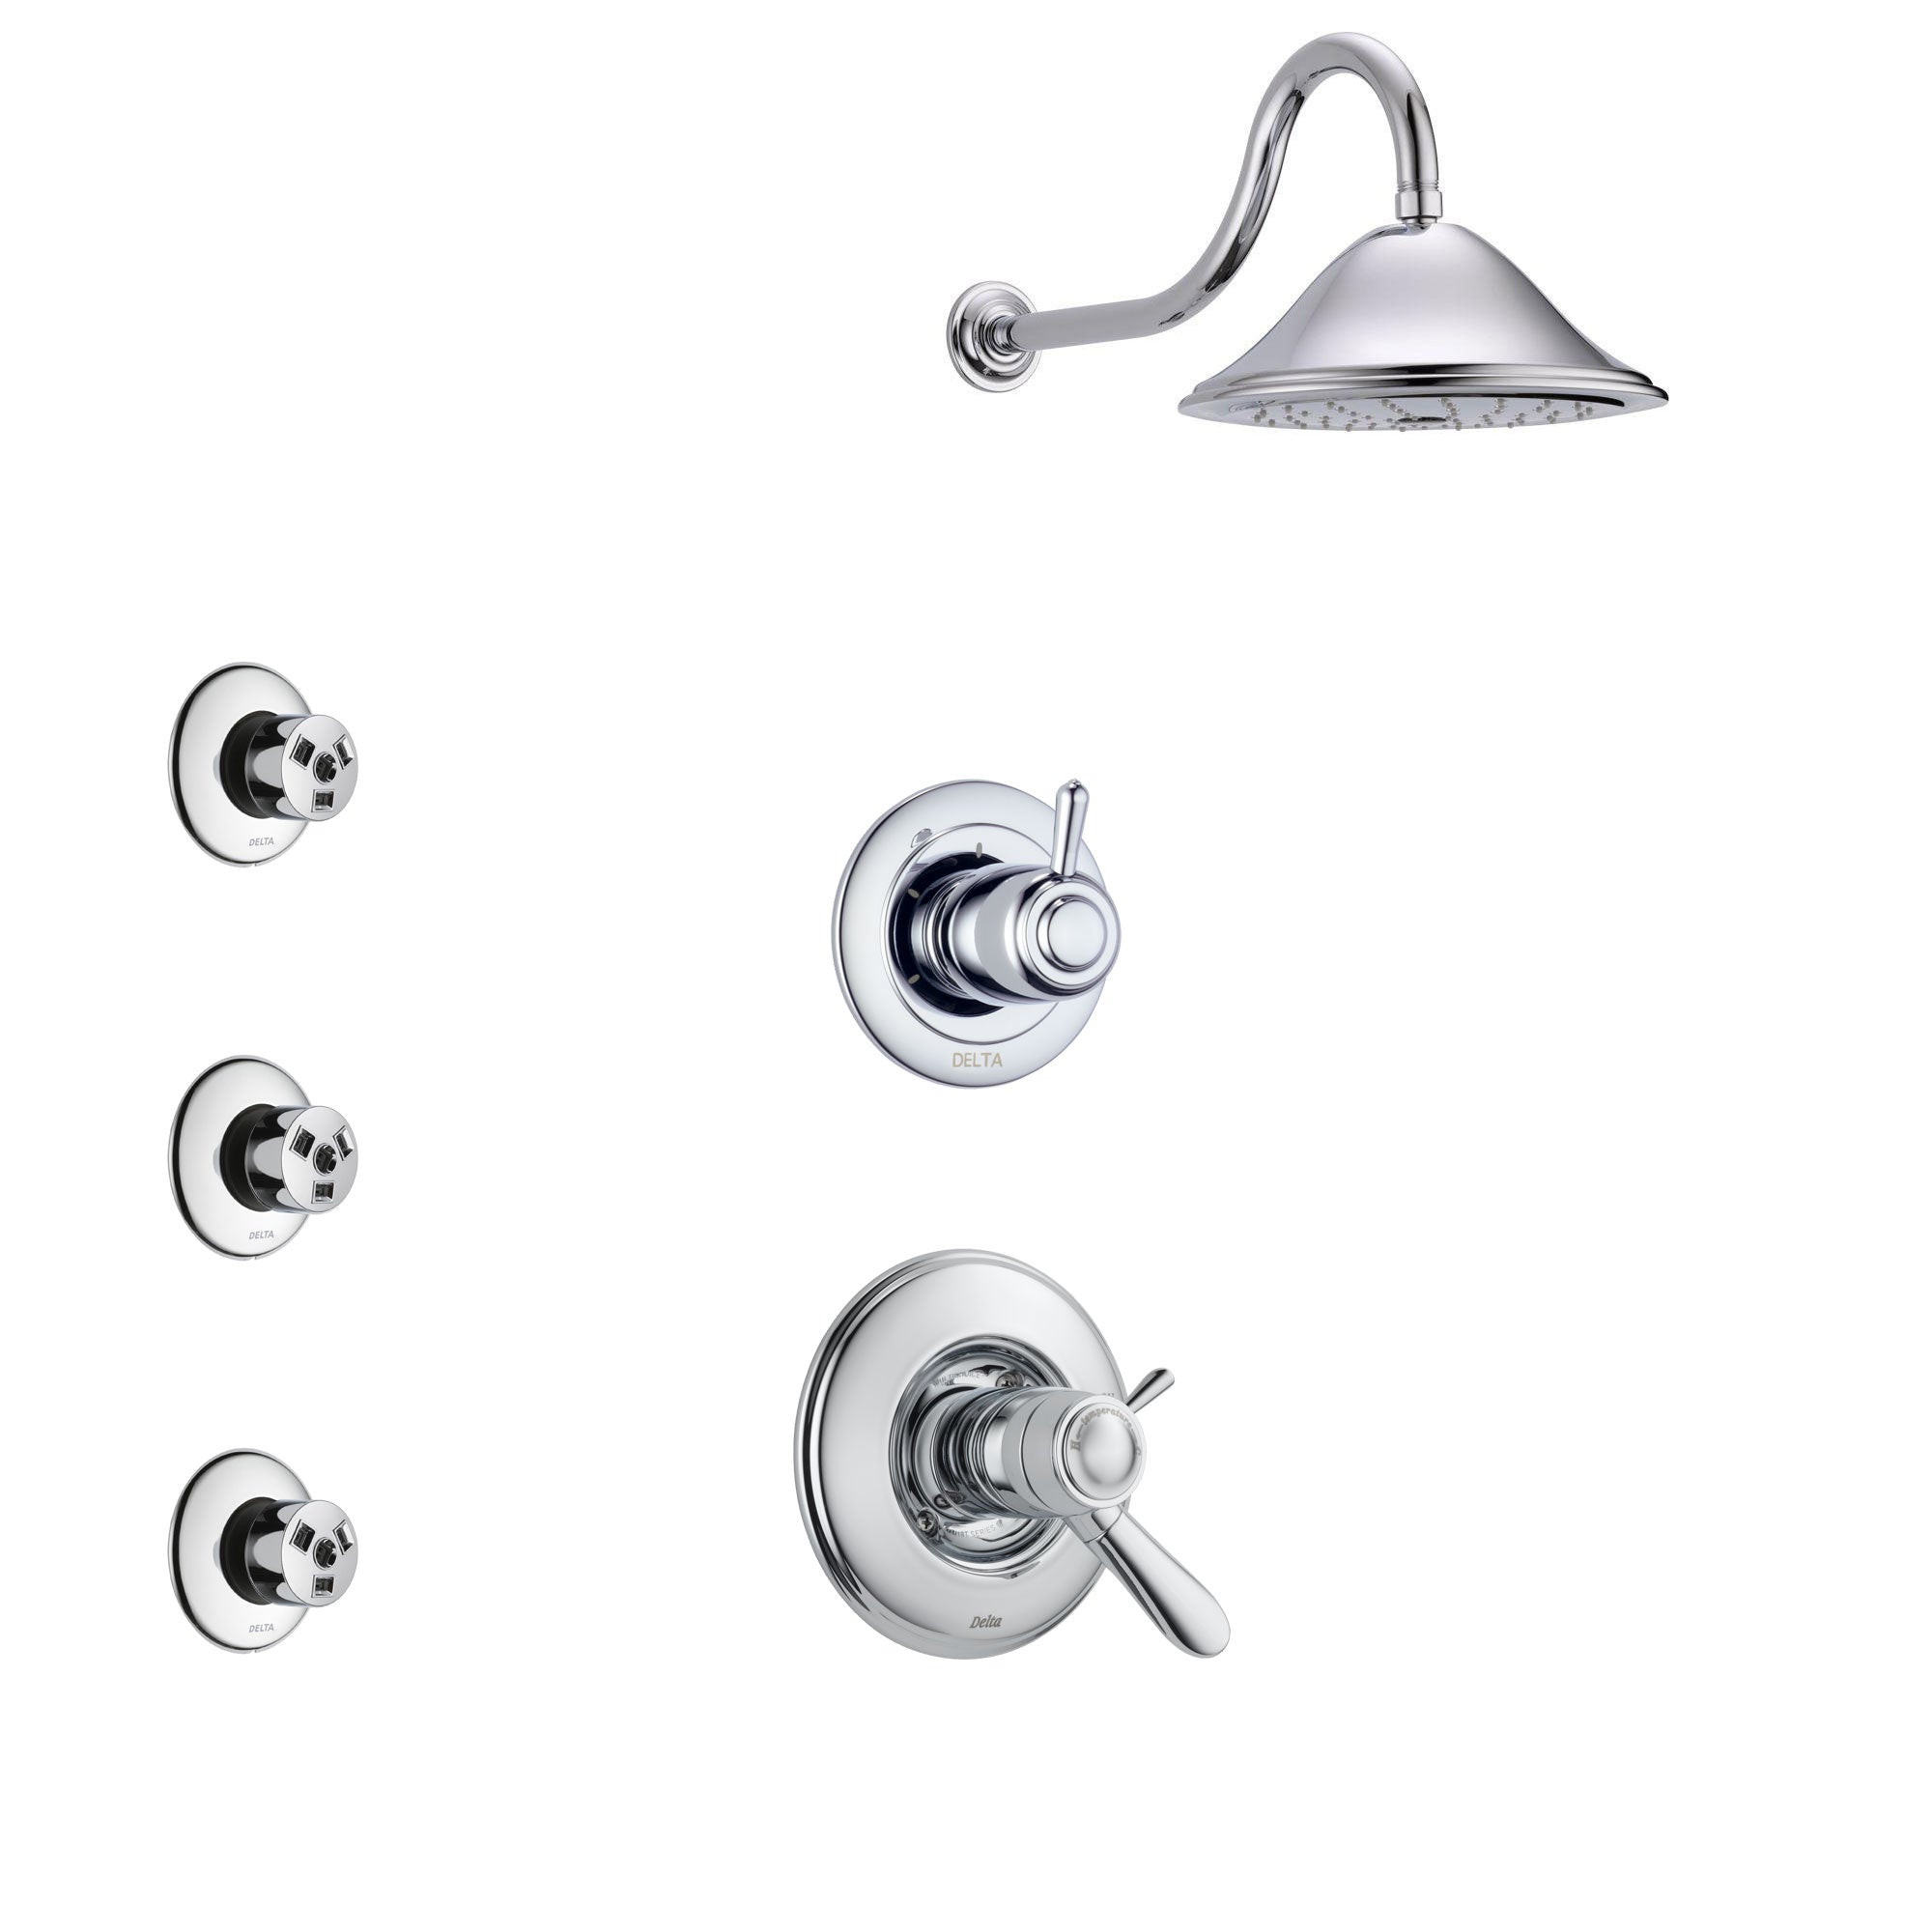 Delta Lahara Chrome Finish Shower System with Dual Thermostatic Control Handle, 3-Setting Diverter, Showerhead, and 3 Body Sprays SS17T3812